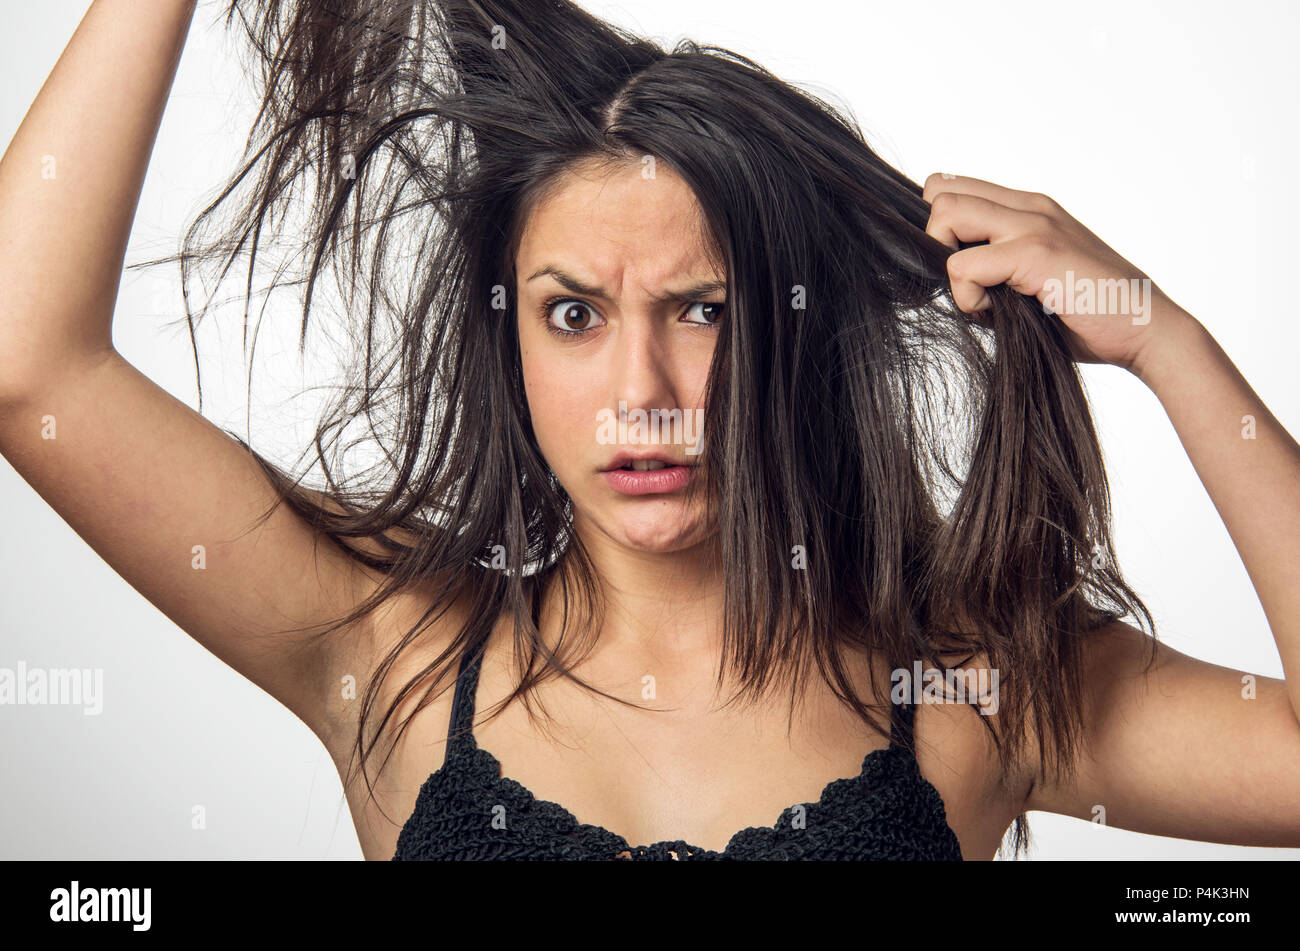 Brunette teenager girl with anger expression pulling her messy hair Stock Photo